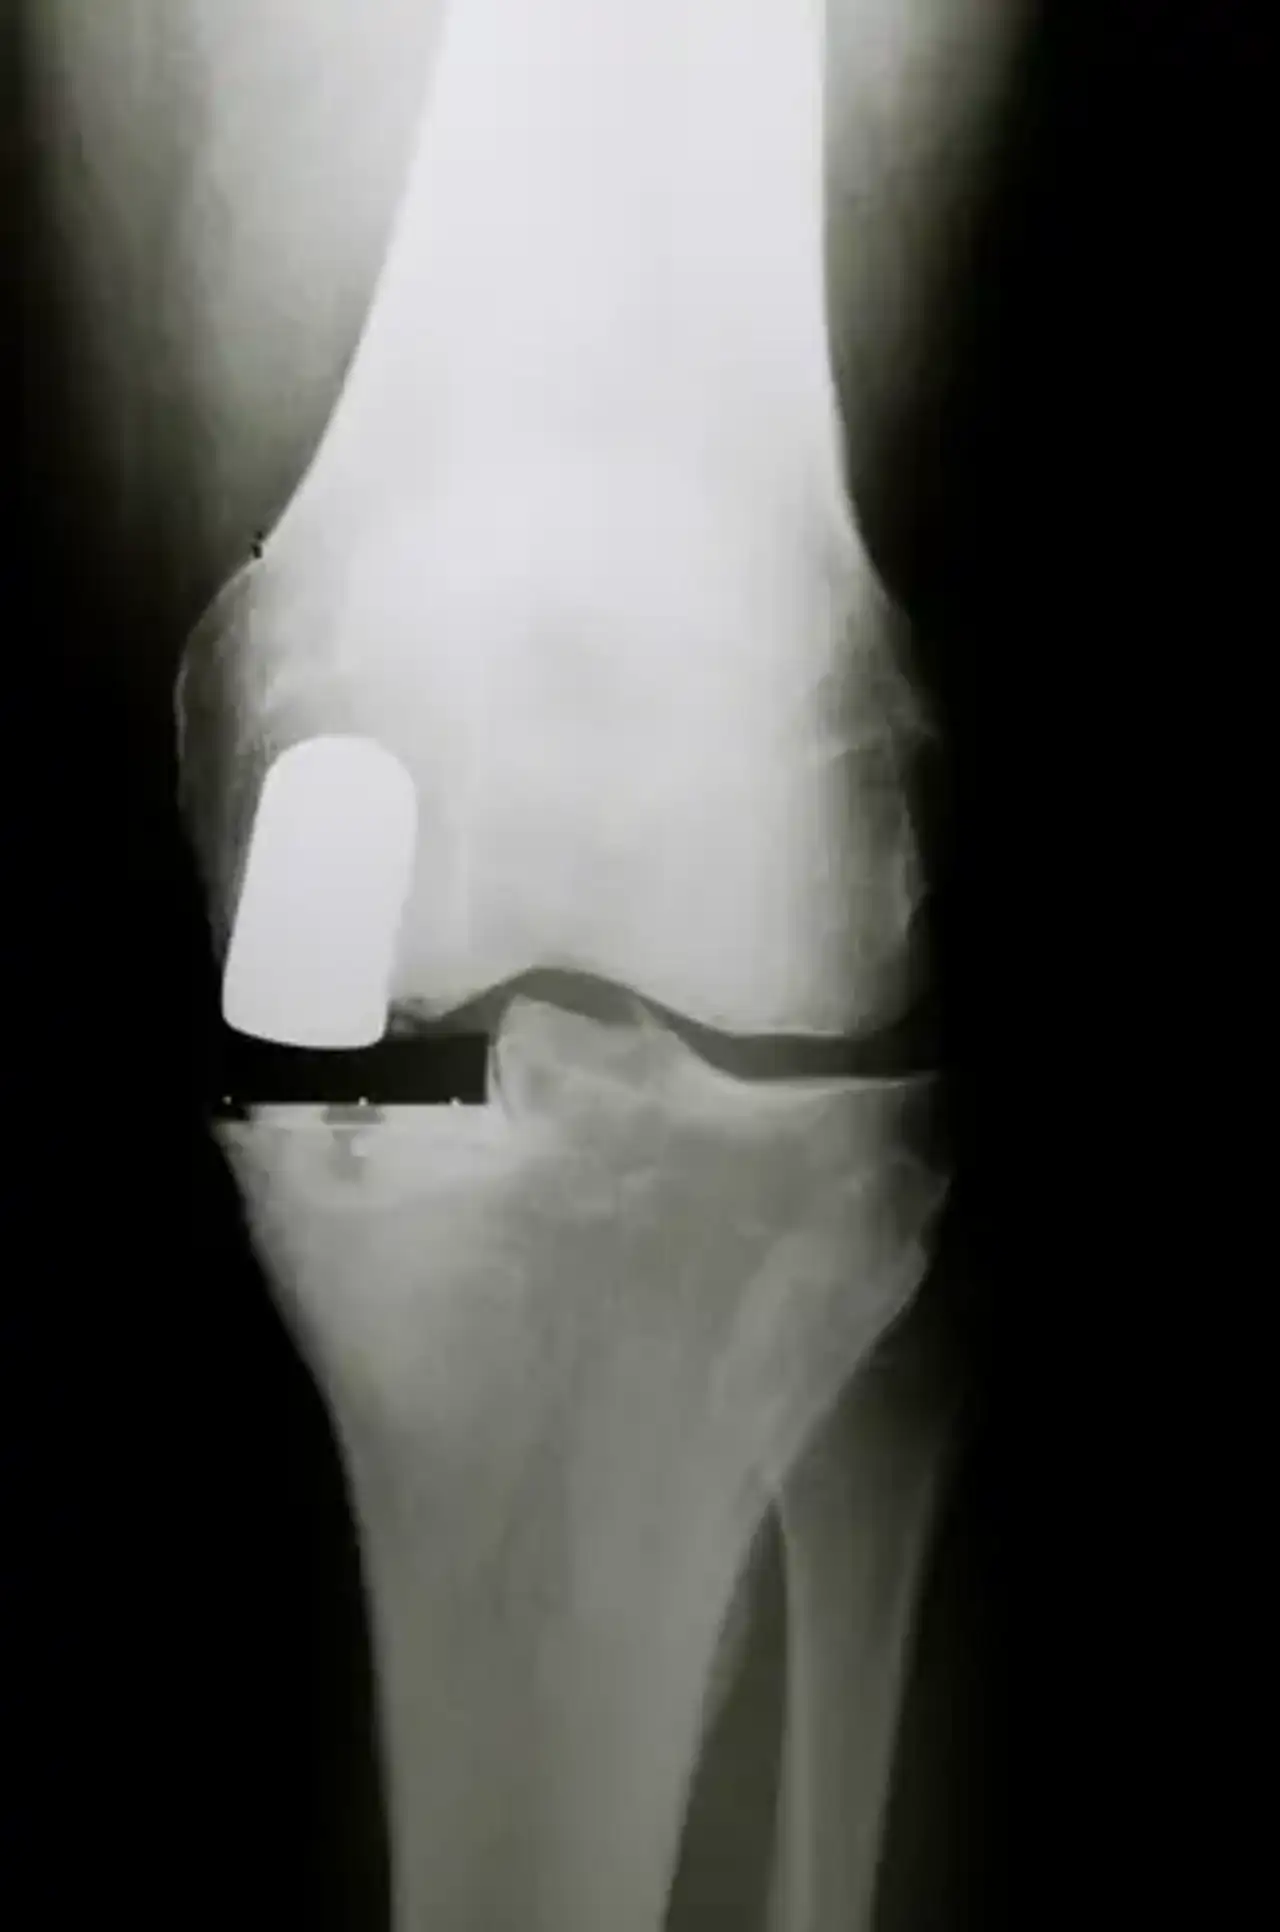 Partial Knee Replacement (PKR)